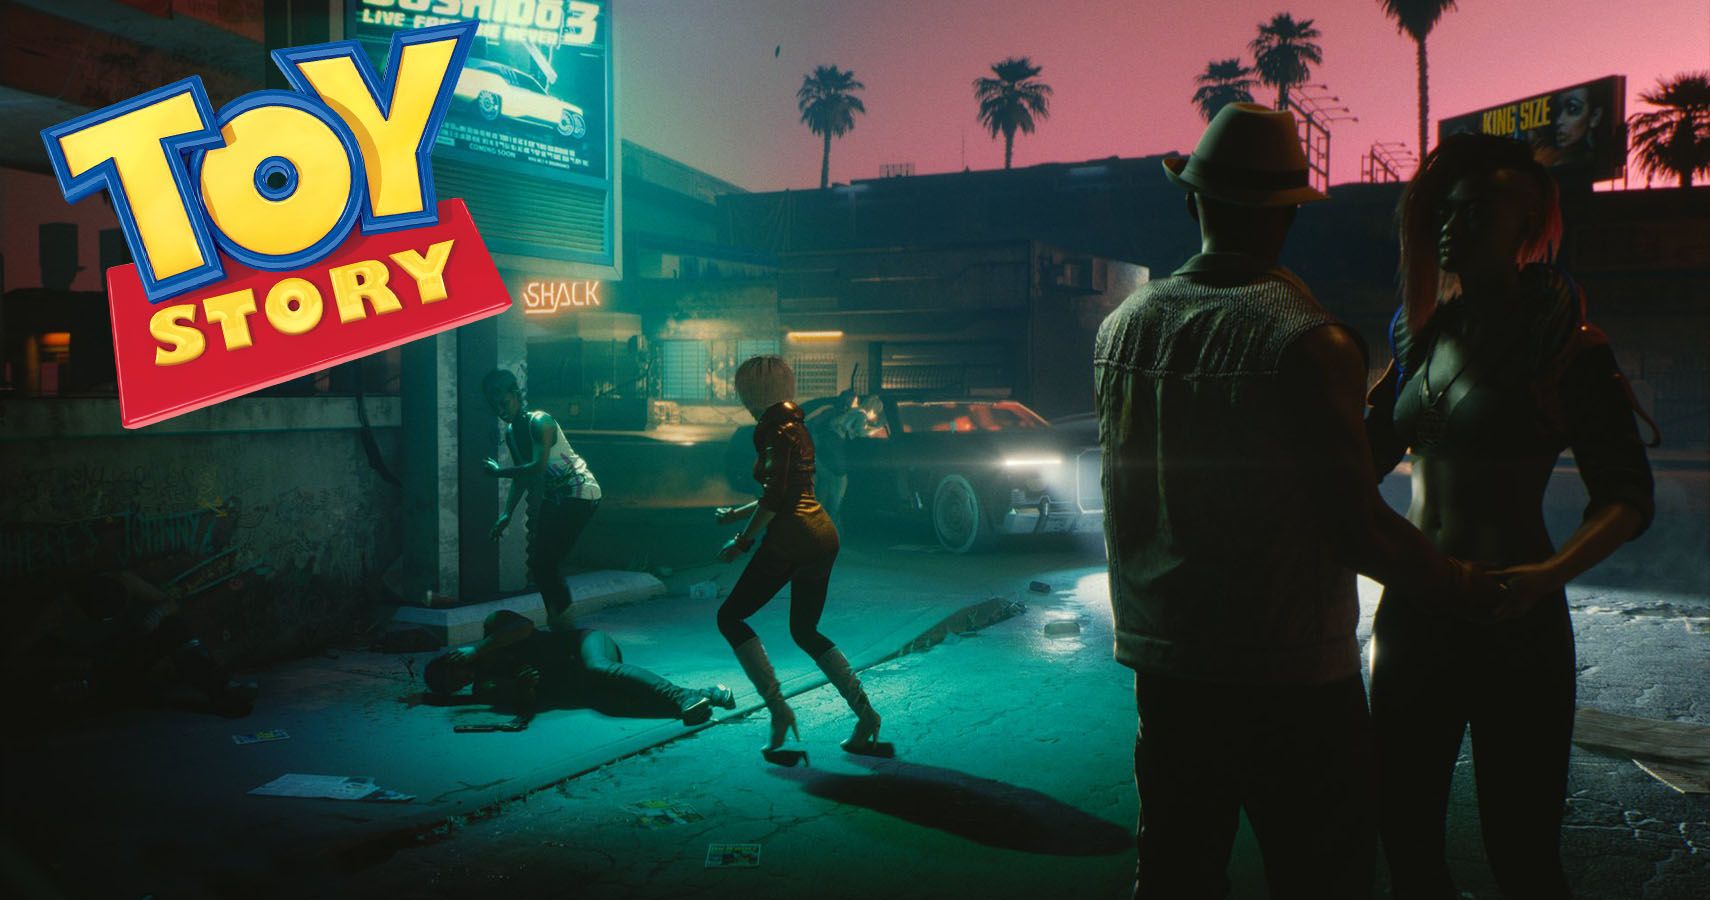 CD Projekt Red Highlights How To Mod Animations In Cyberpunk 2077 - Gameranx